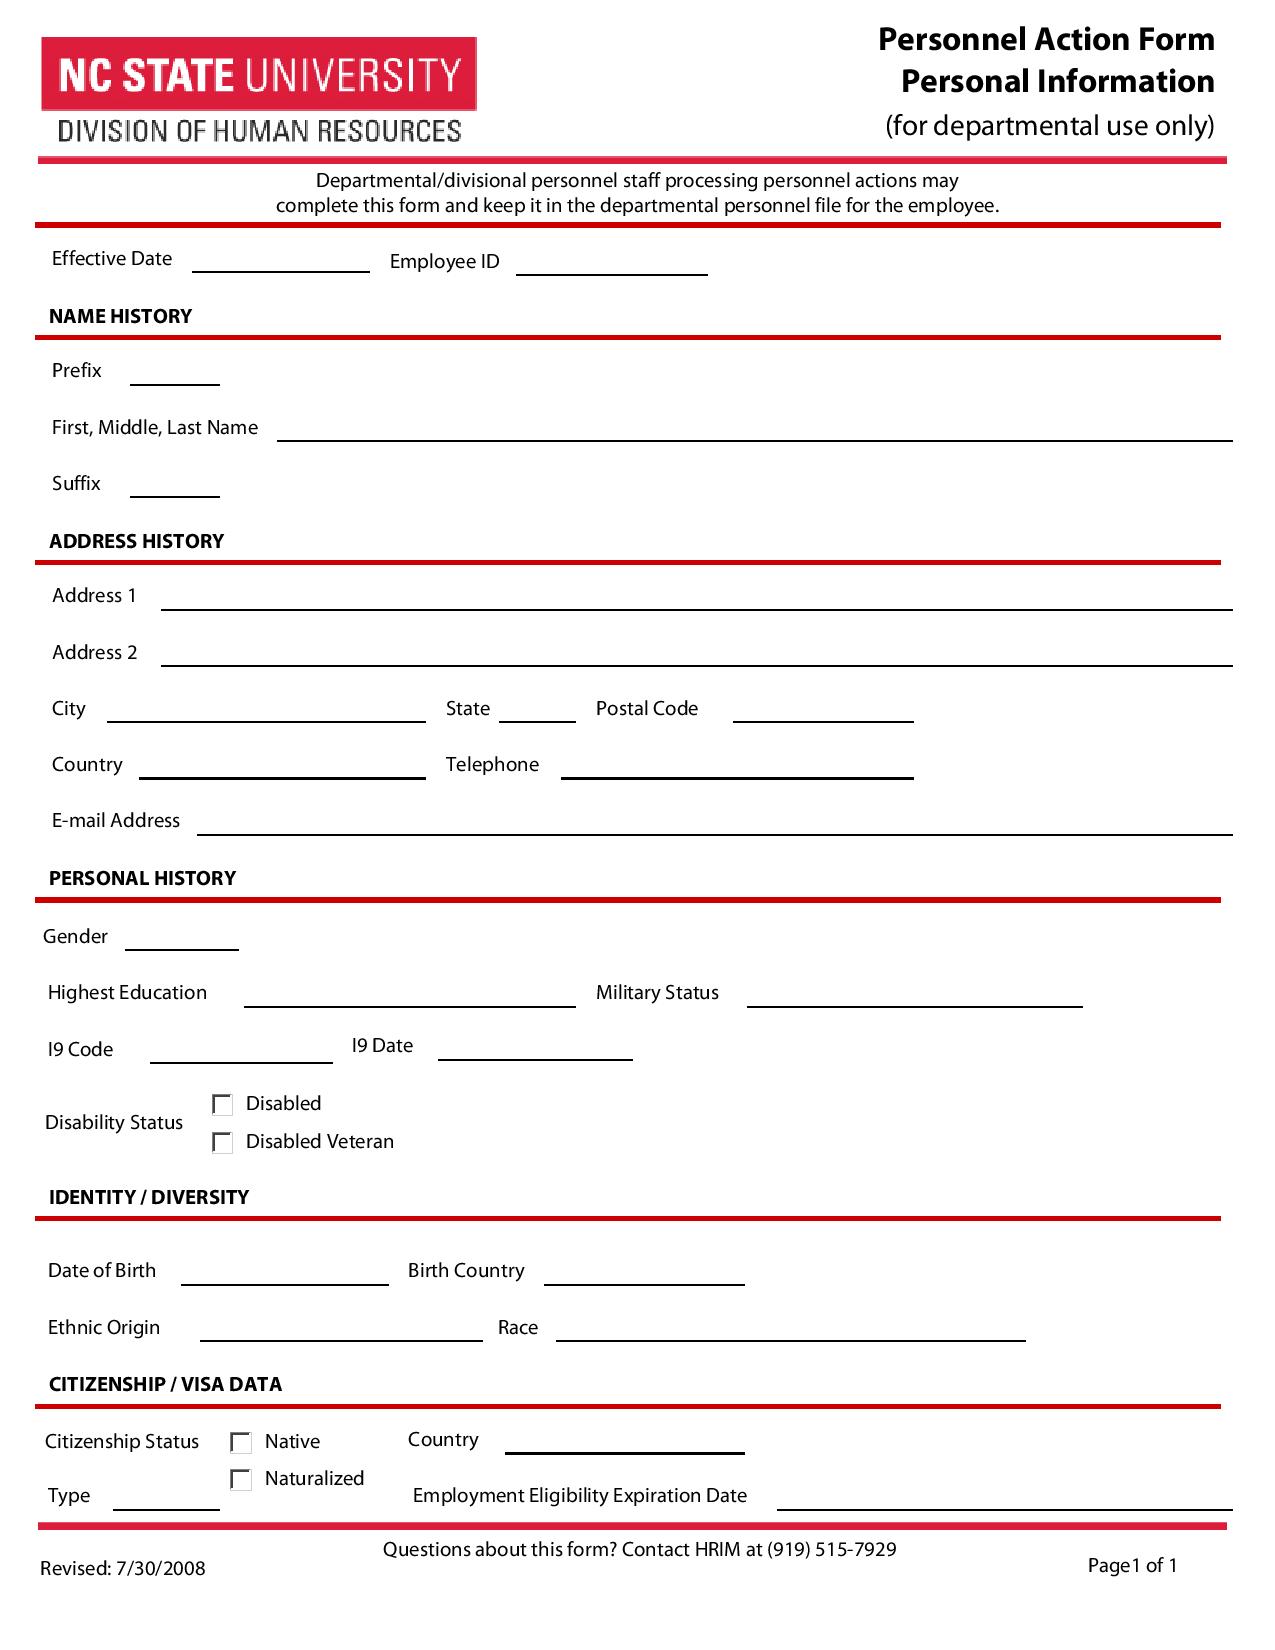 personnel action form personal information page 001